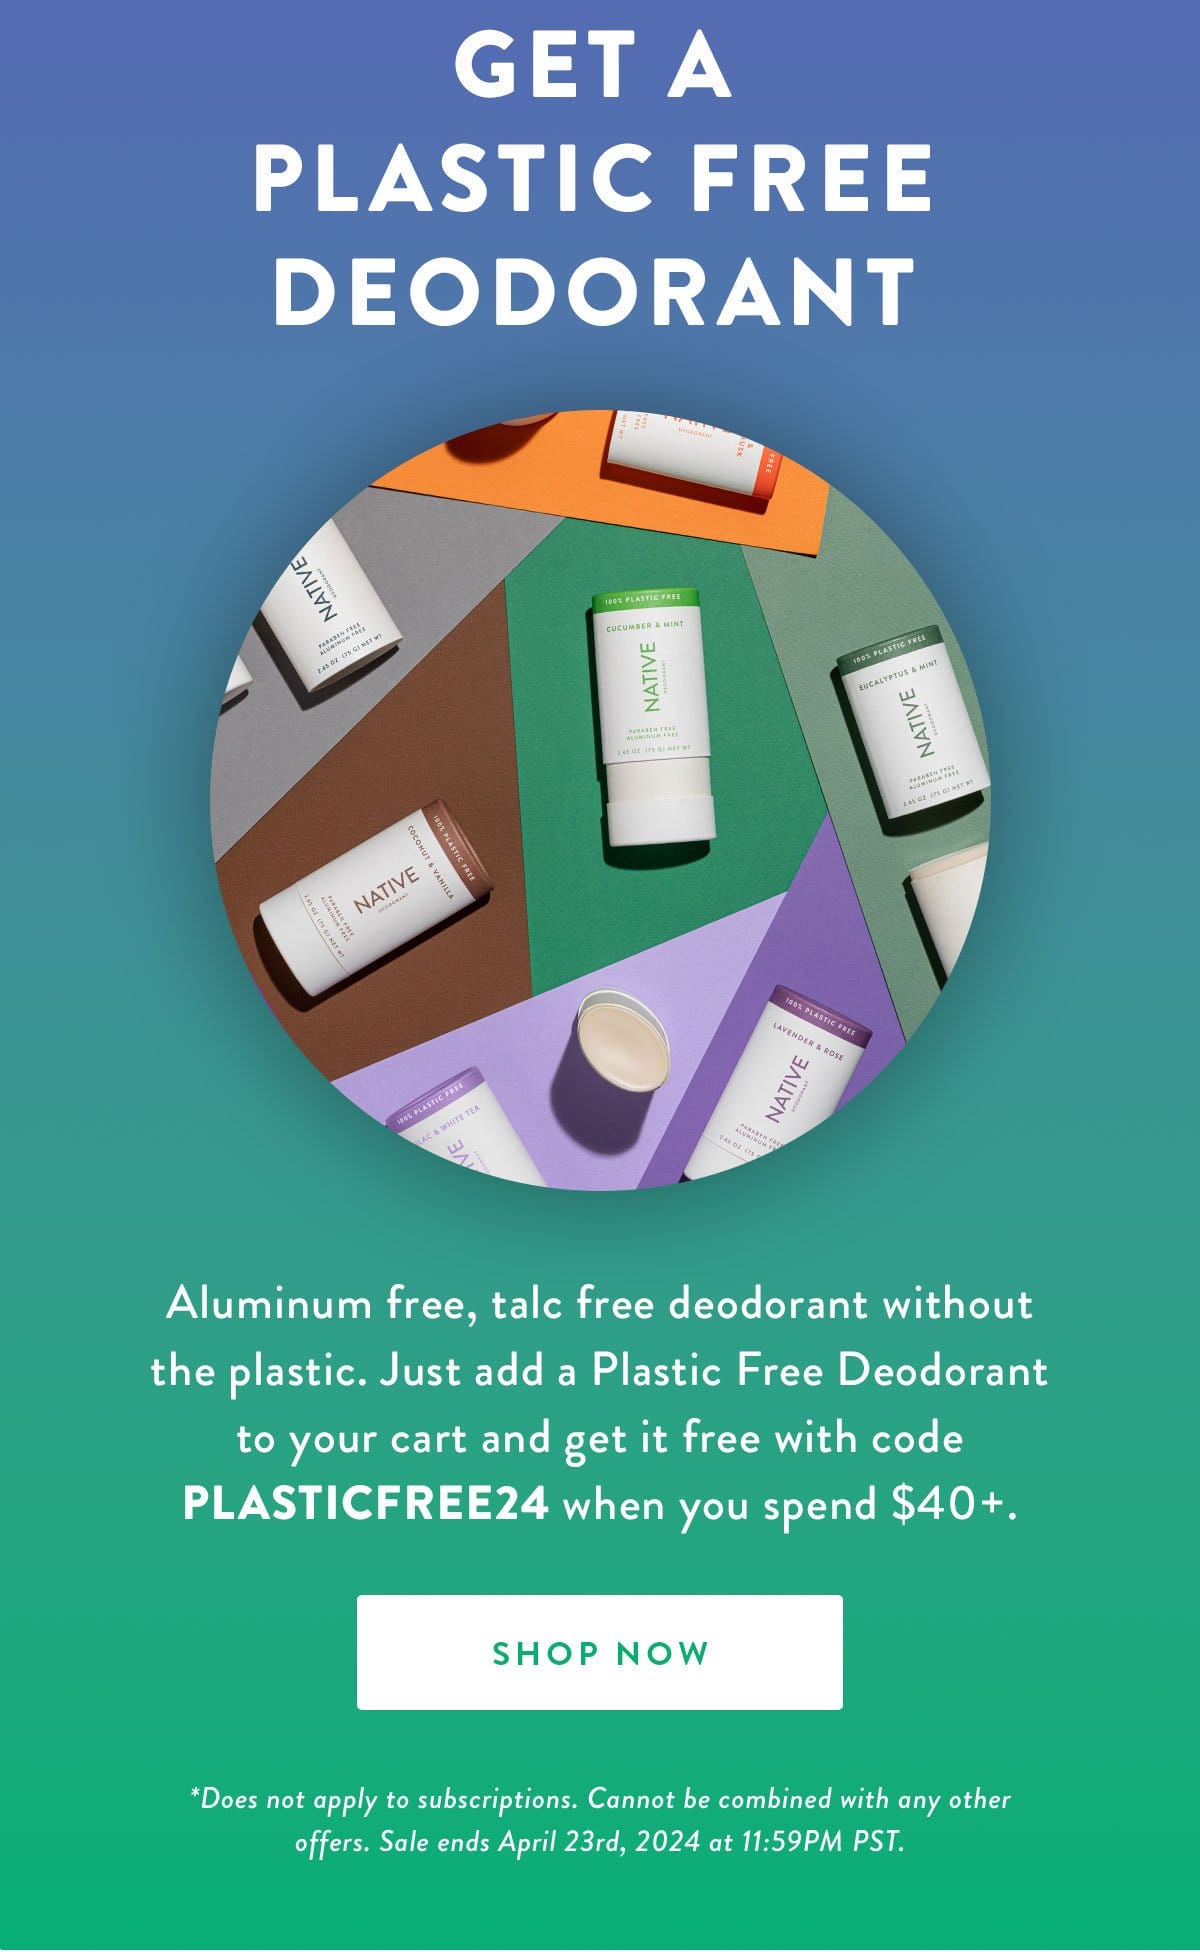 Get a Plastic Free Deodorant | Aluminum free, talc free deodorant without the plastic. Just add a Plastic Free Deodorant to your cart and get it free with code PLASTICFREE24 when you spend \\$40+. | SHOP NOW | *Does not apply to subscriptions. Cannot be combined with any other offers. Sale ends April 23rd, 2024 at 11:59PM PST.